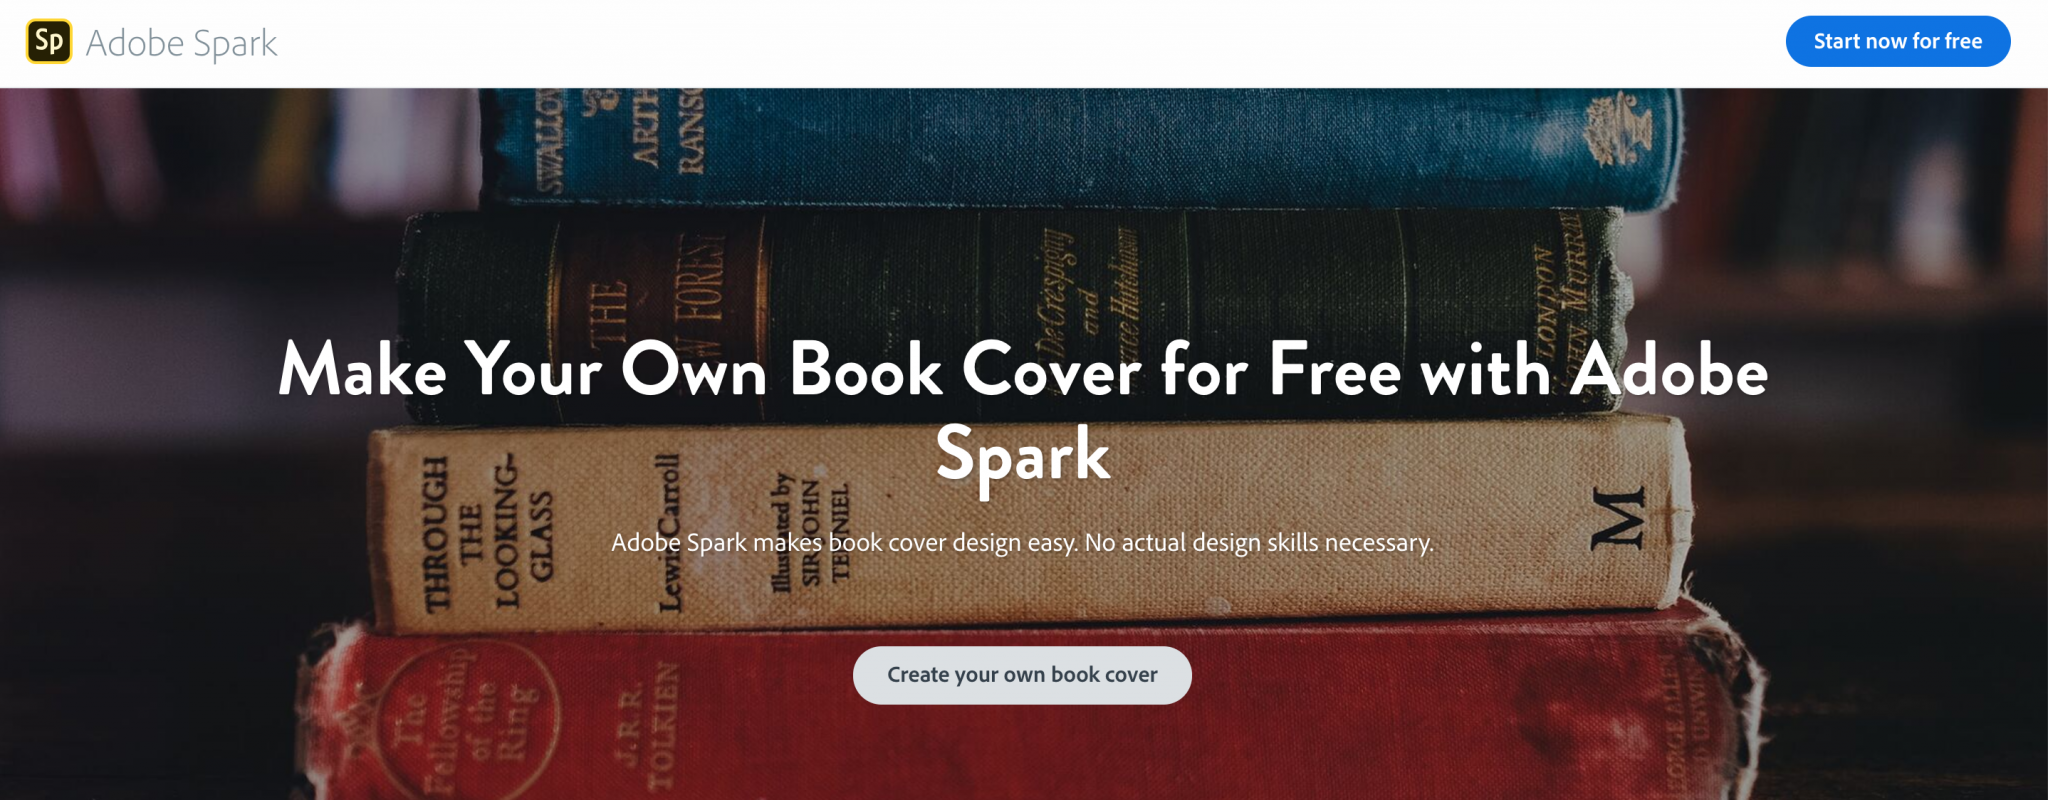 Free Book Cover Makers for Non-Designers. thinkmaverick